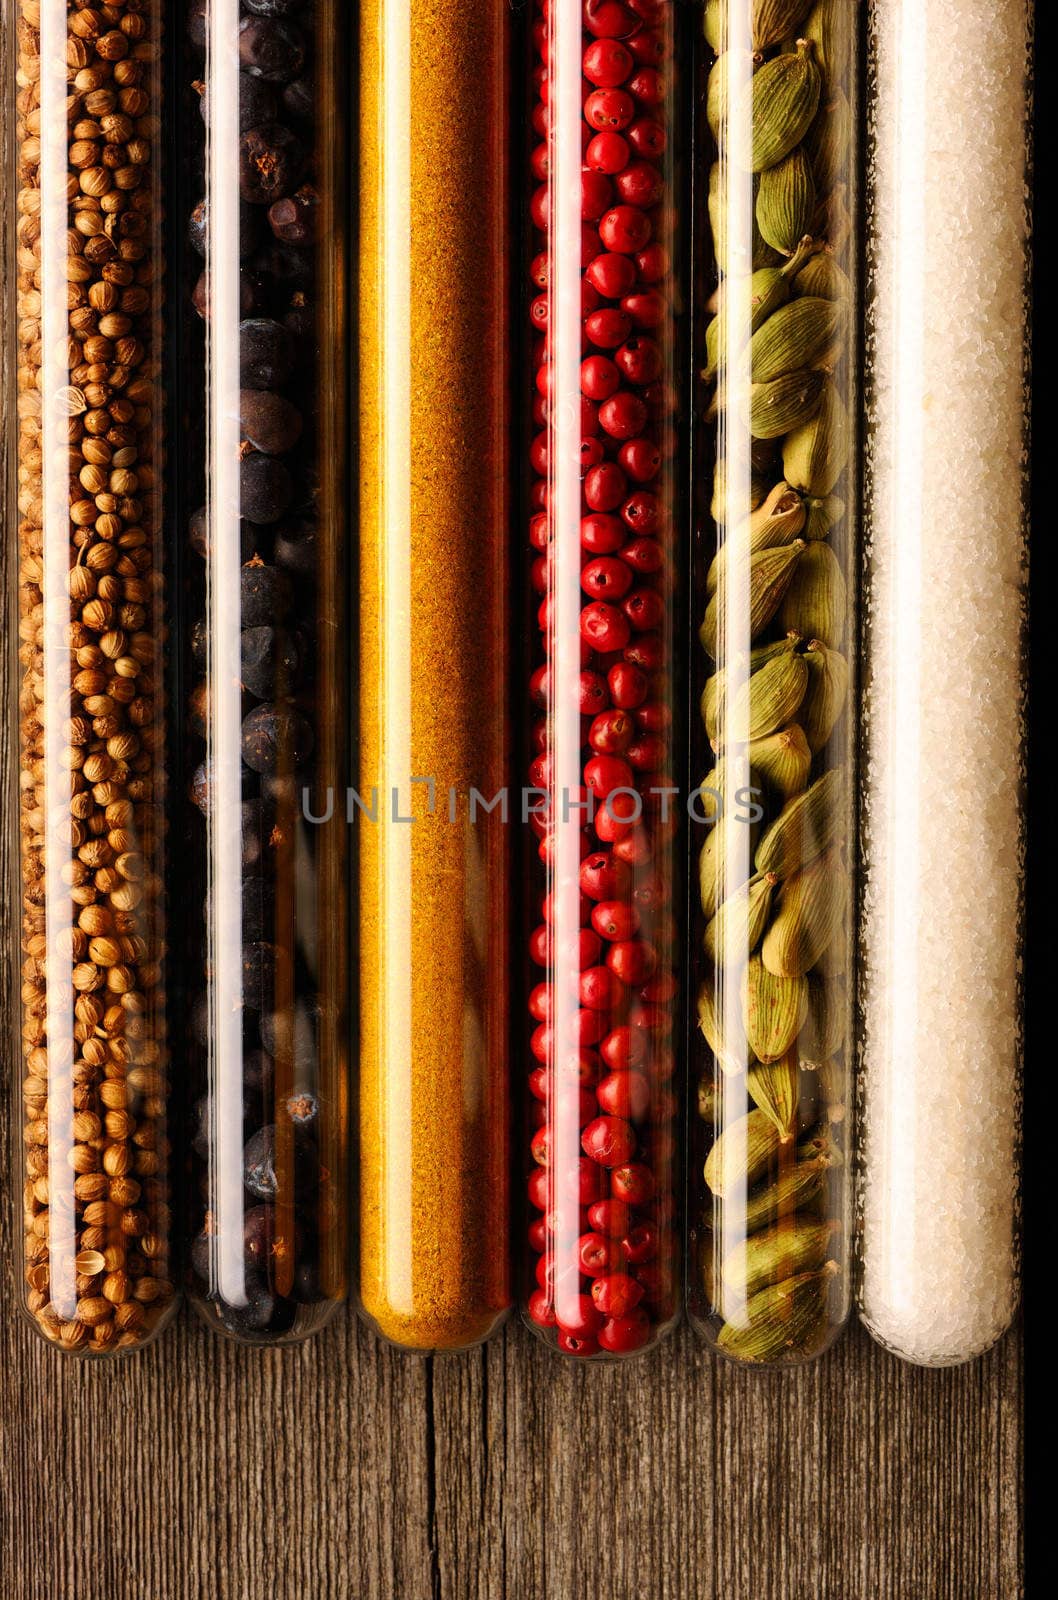 Spices in beakers close-up by haveseen